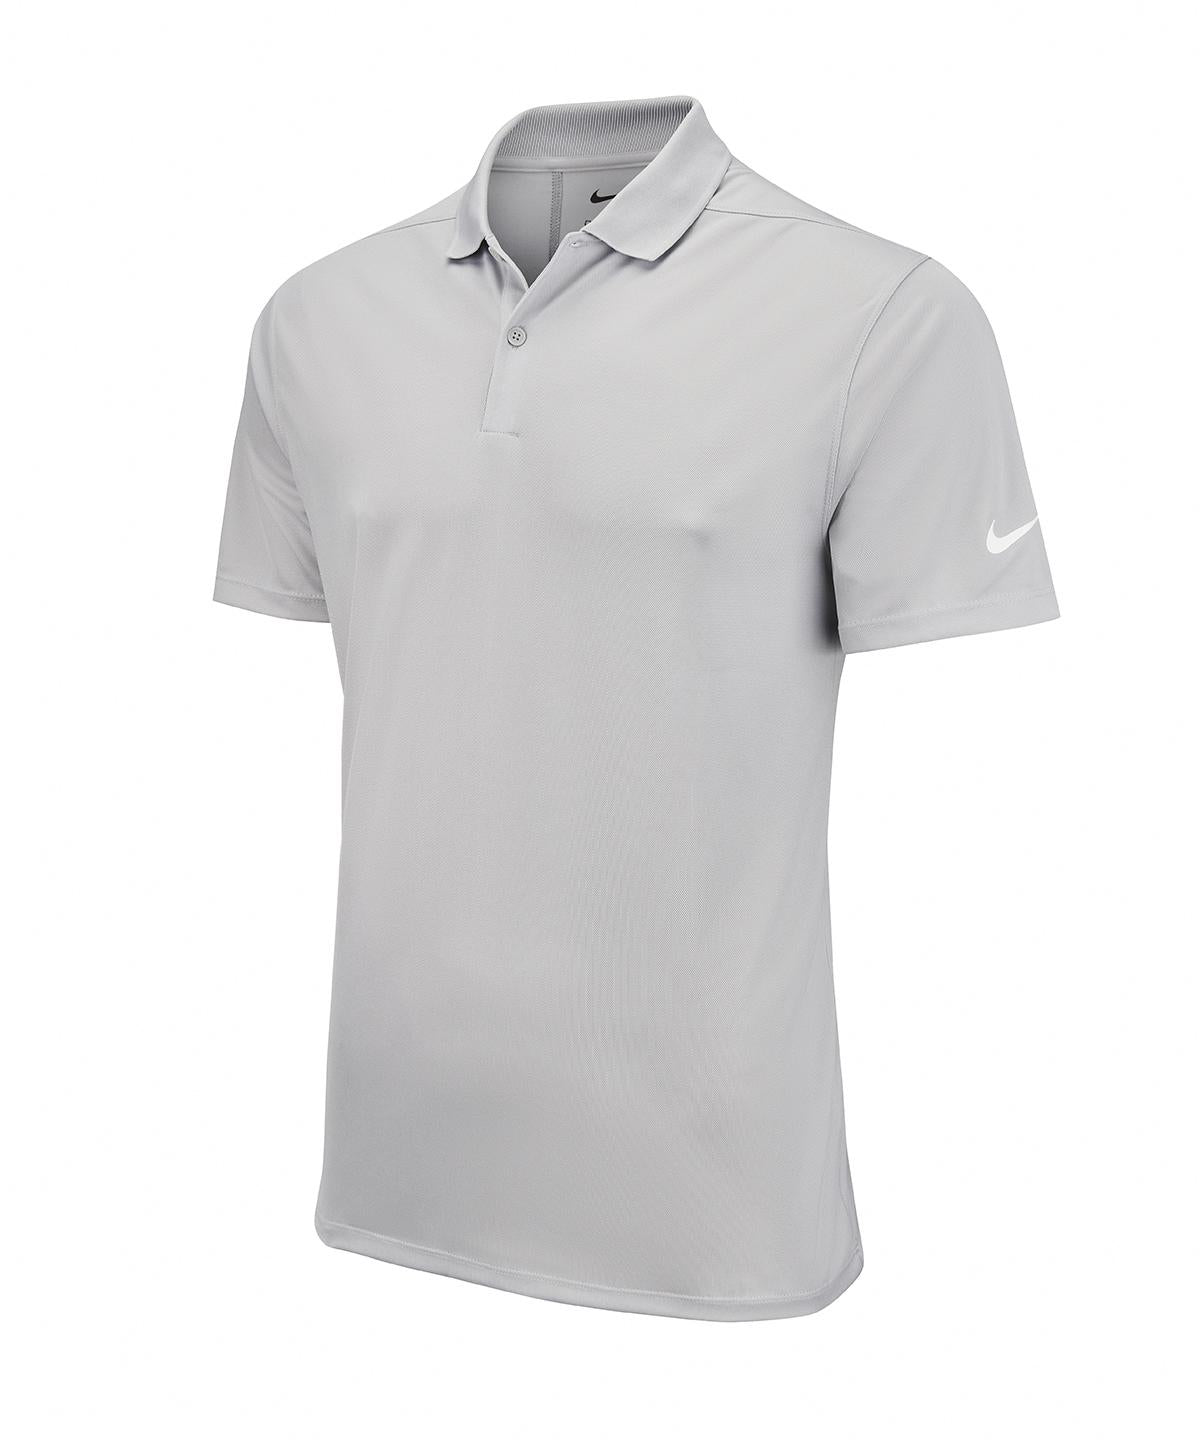 NK342 - Nike Victory Solid Polo